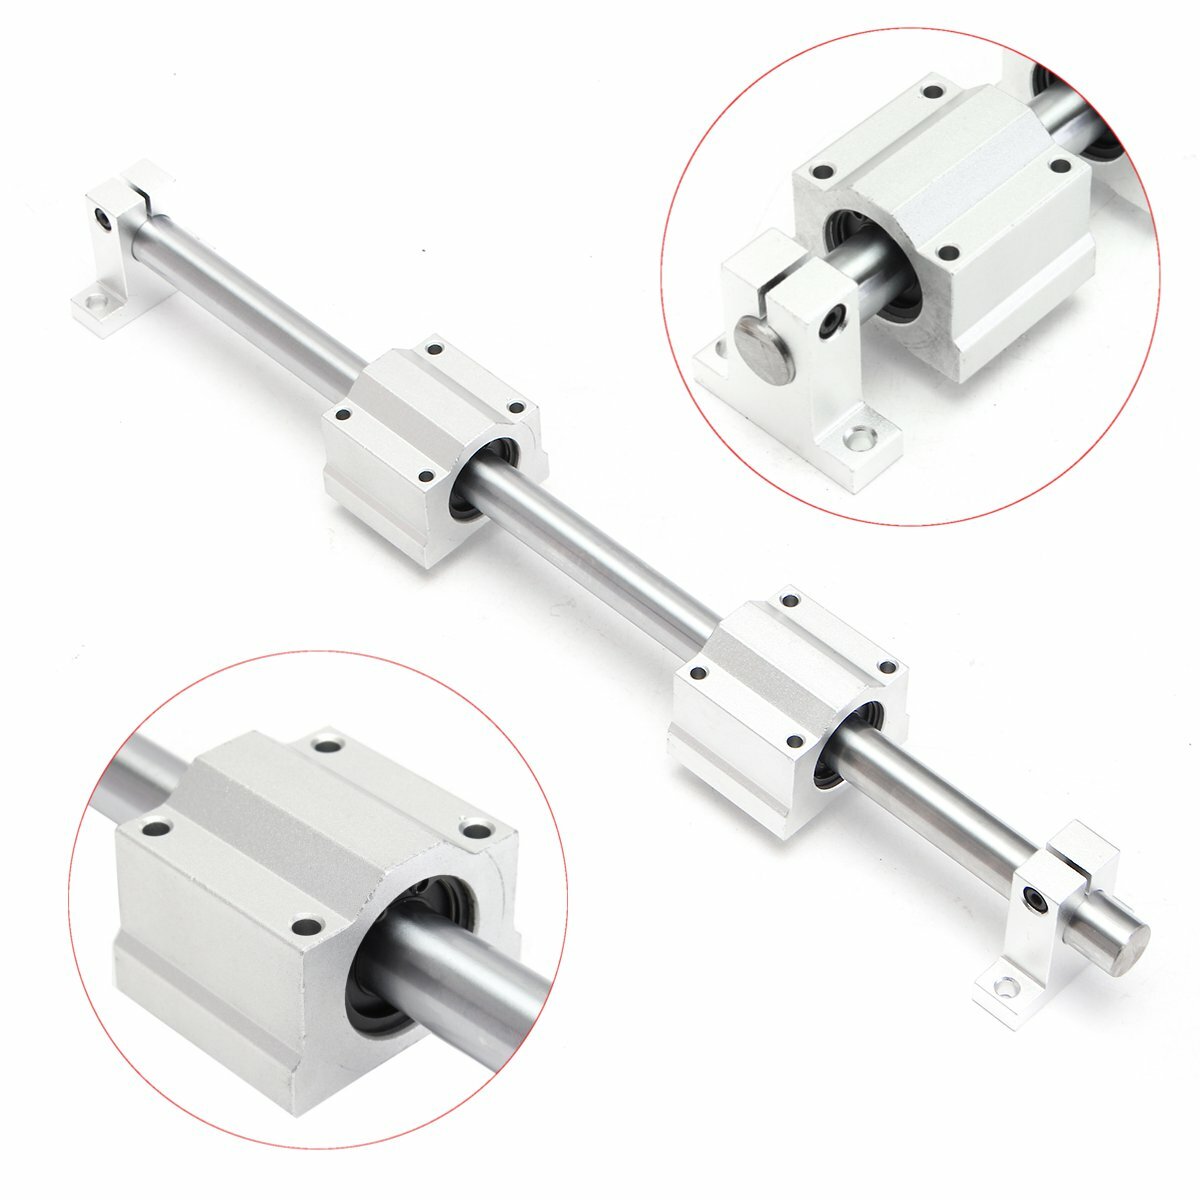 Image of Machifit 16mm x 1000mm Linear Rail Shaft With Bearing Block and Guide Support For CNC Parts